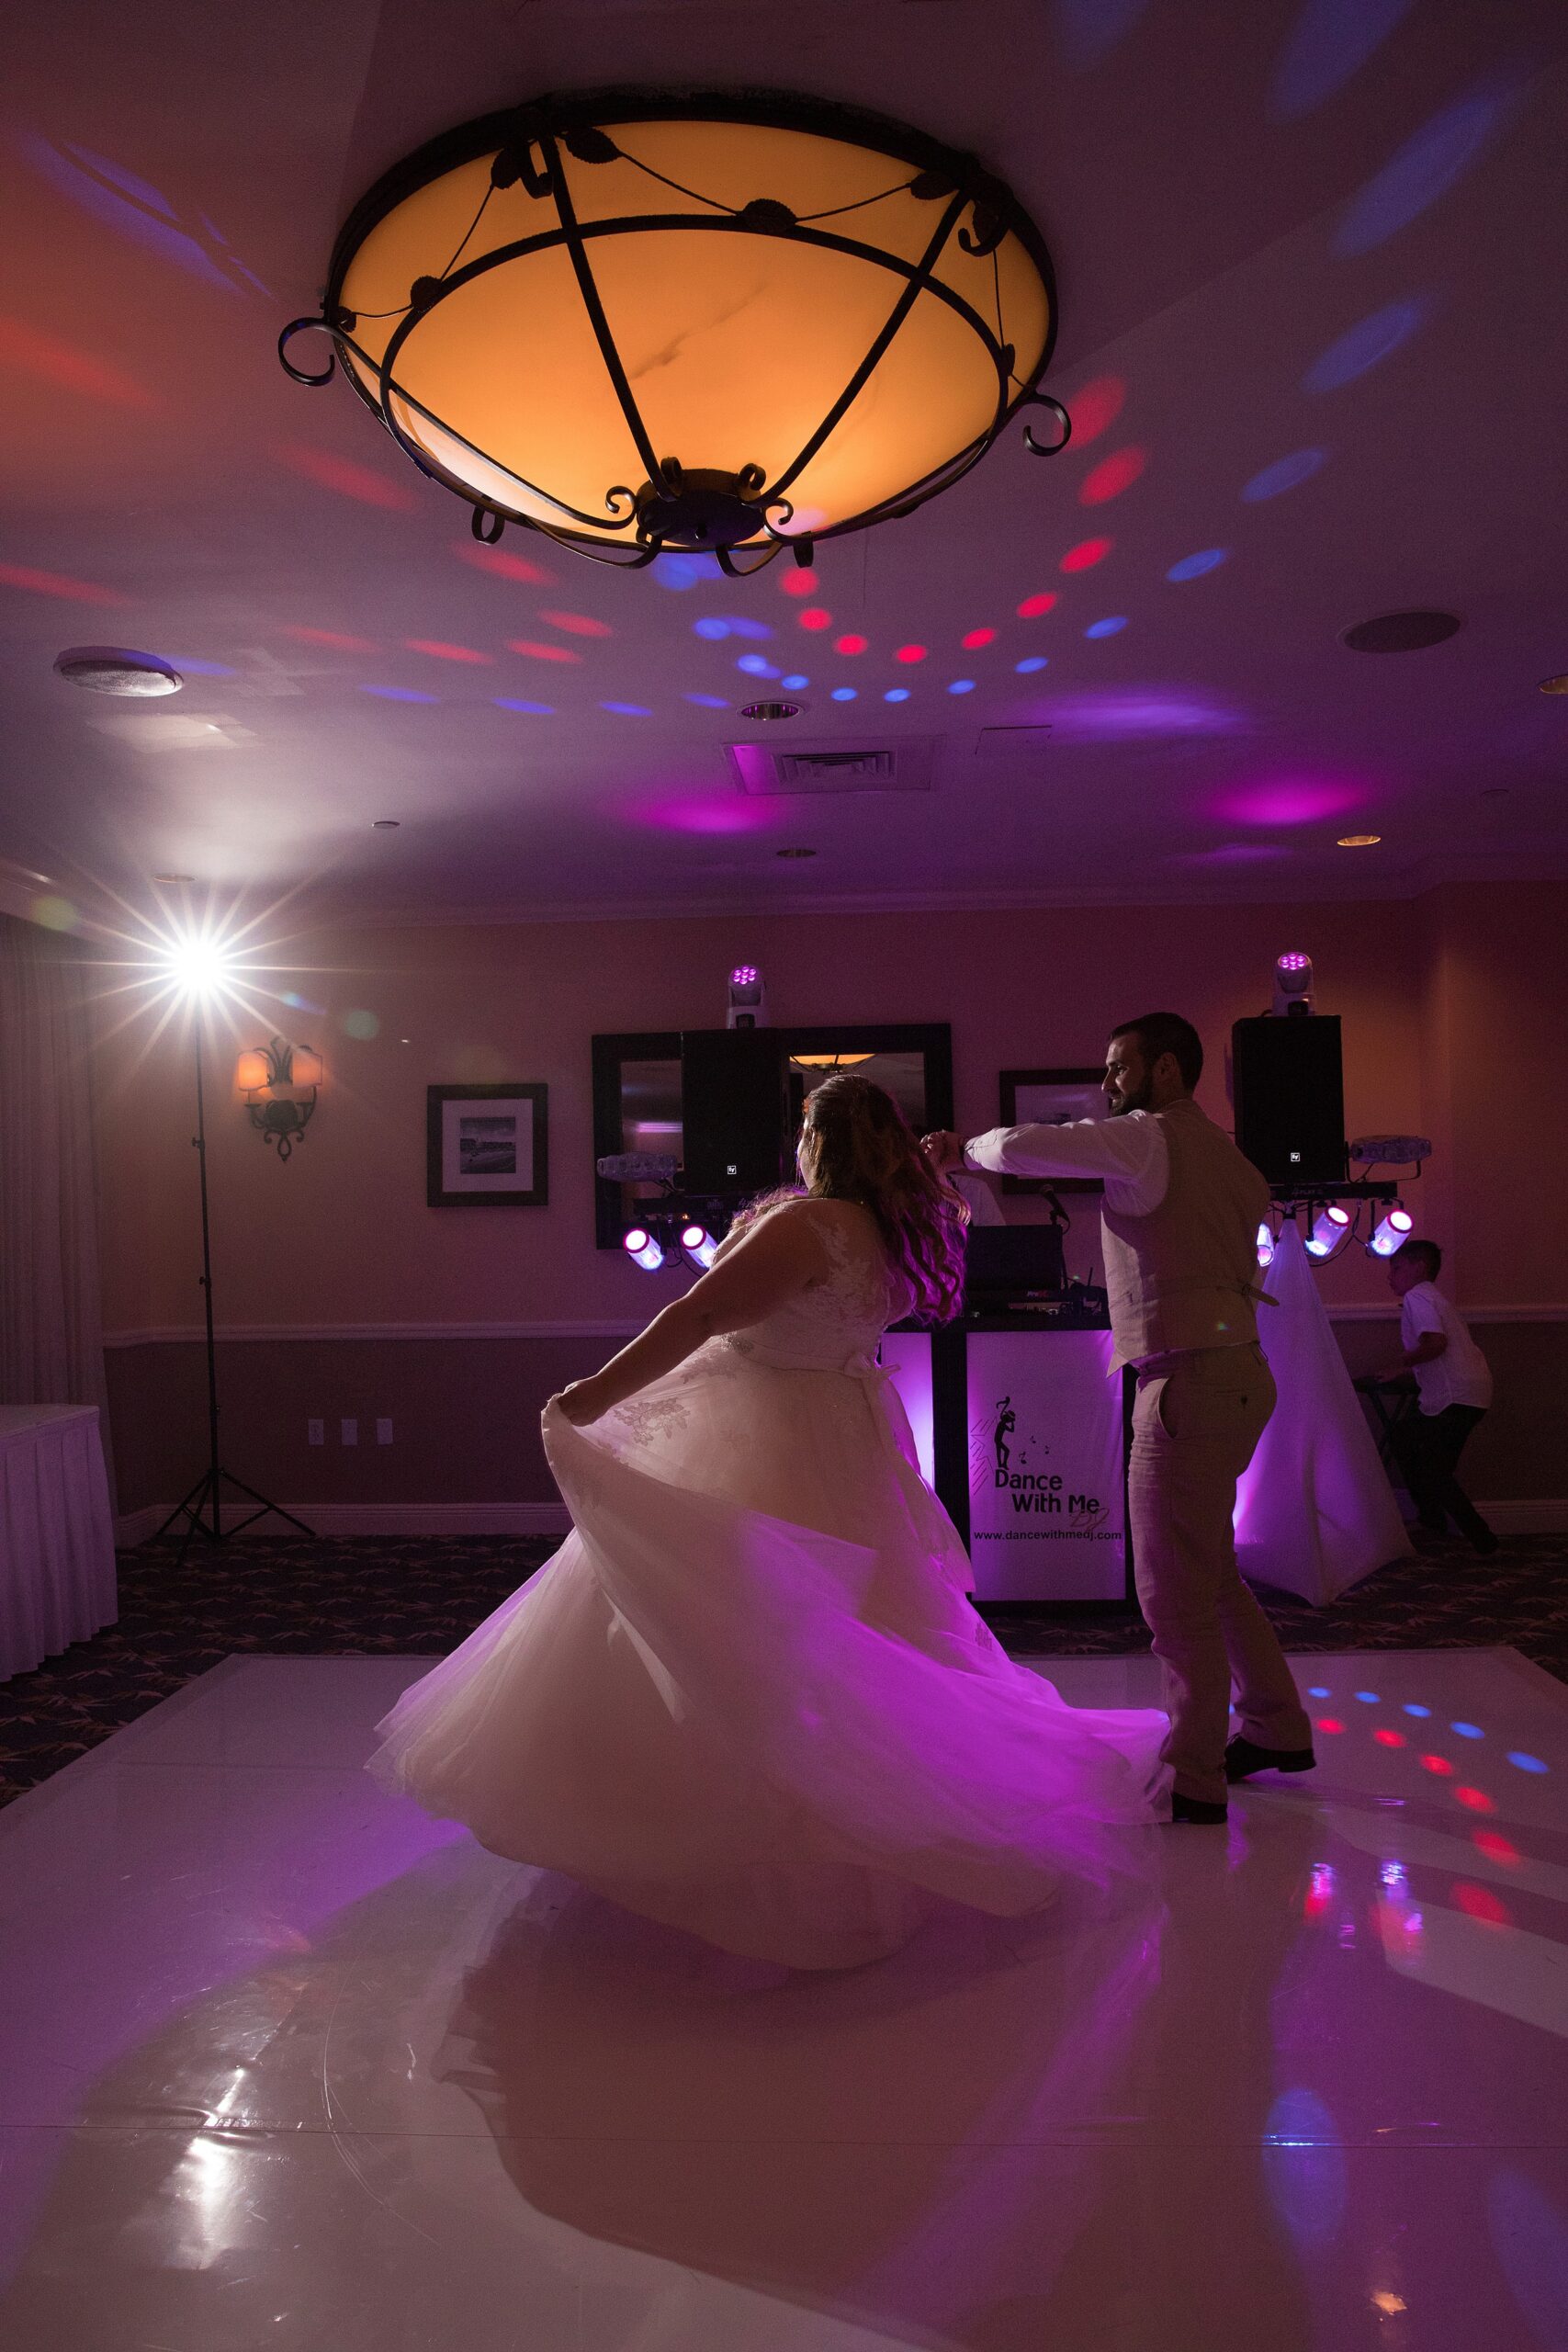 Newlyweds dance and twirl under purple lights in a ballroom for the first time